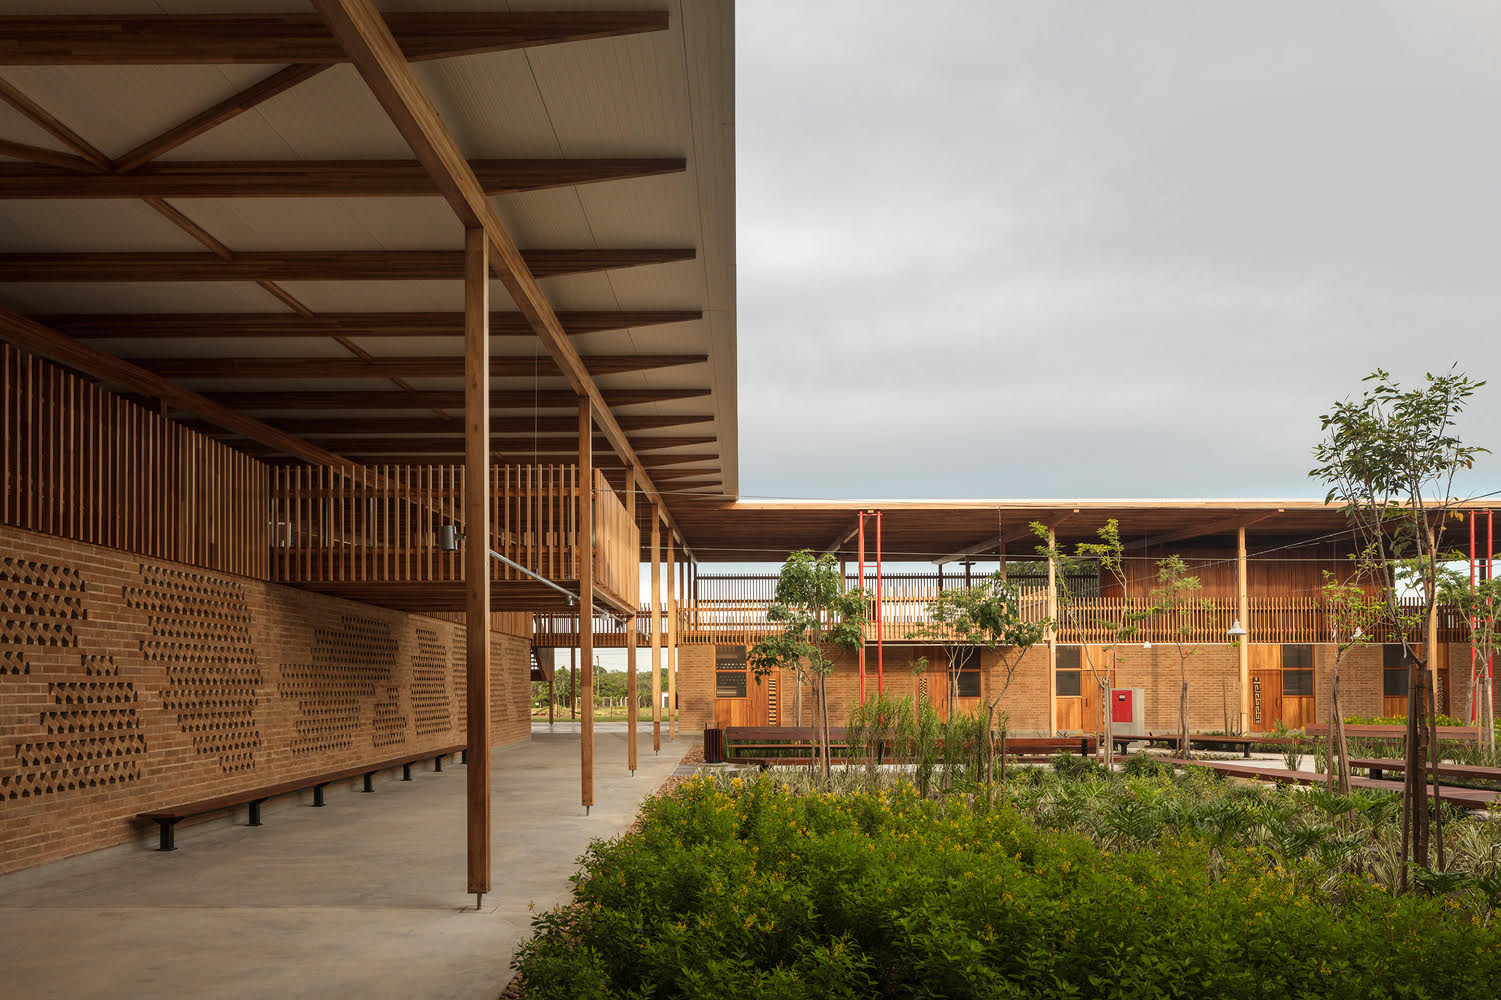 One of the vibrant courtyards inside the new Children's Village school in rural Brazil. 